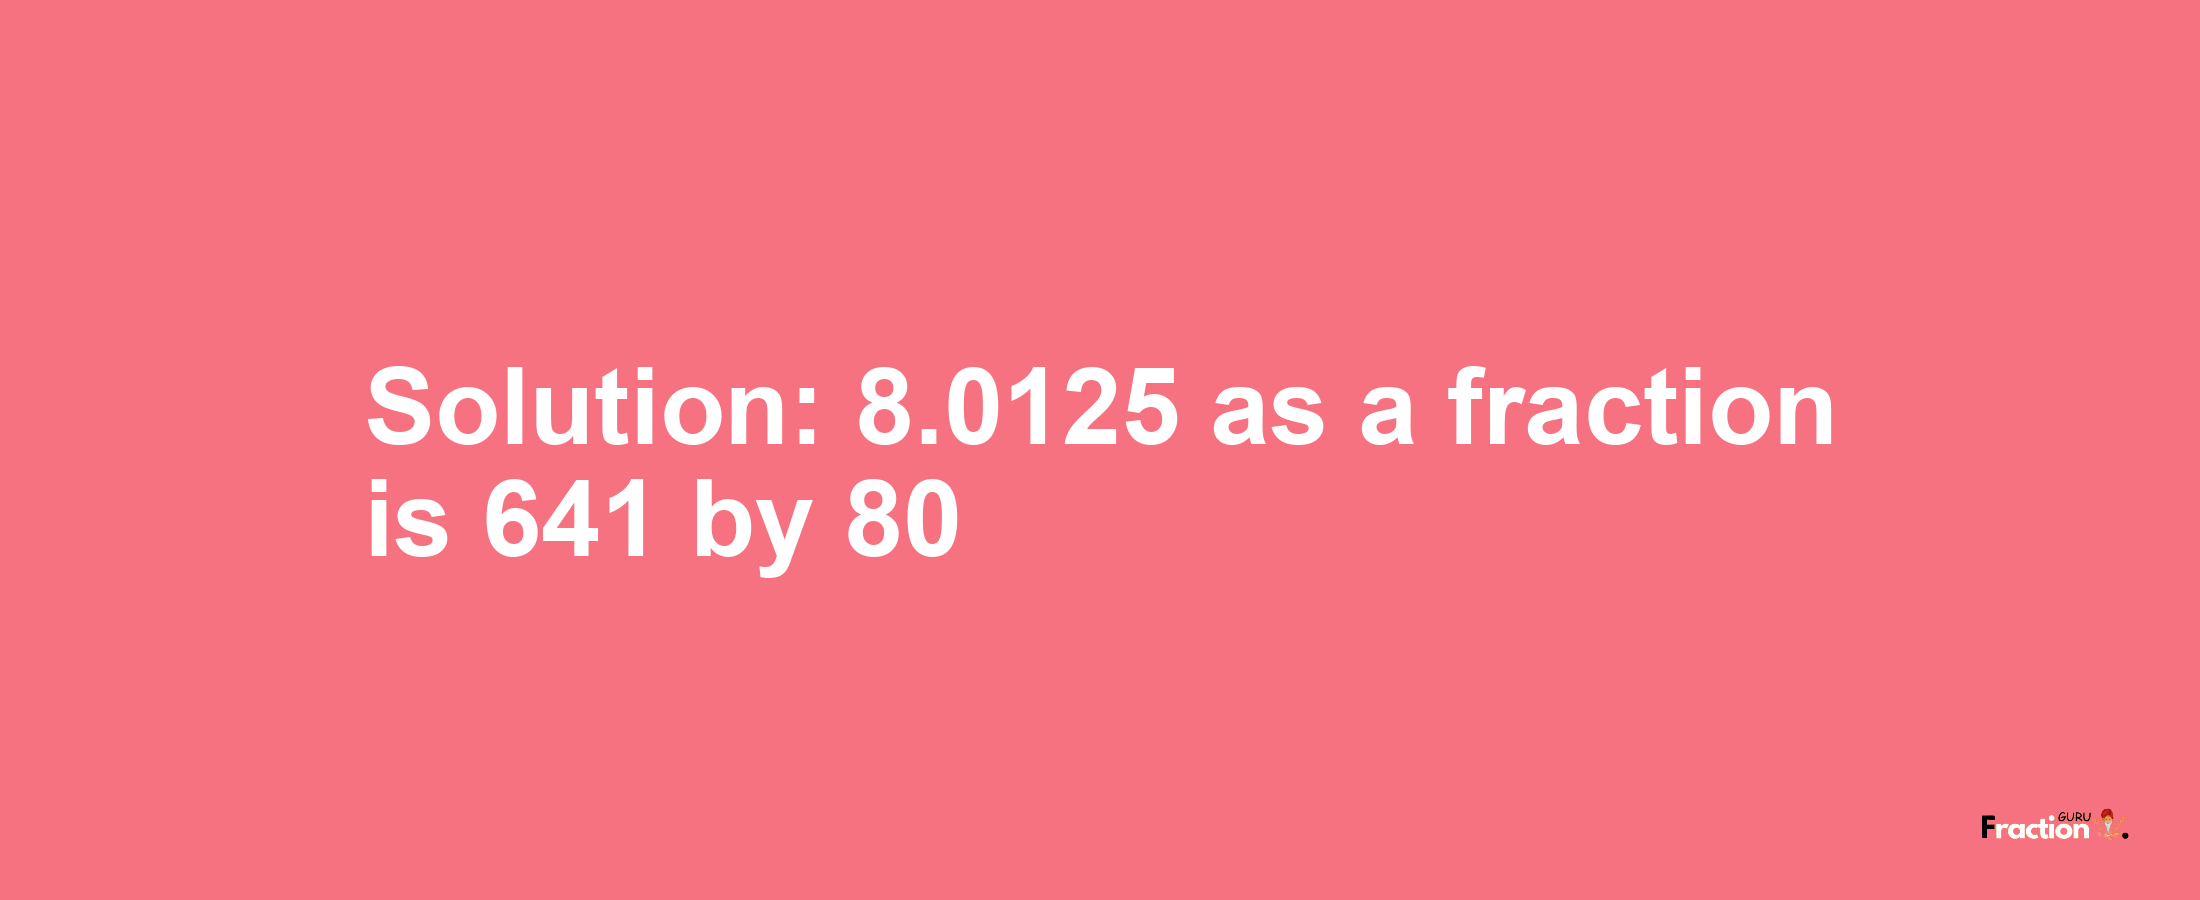 Solution:8.0125 as a fraction is 641/80